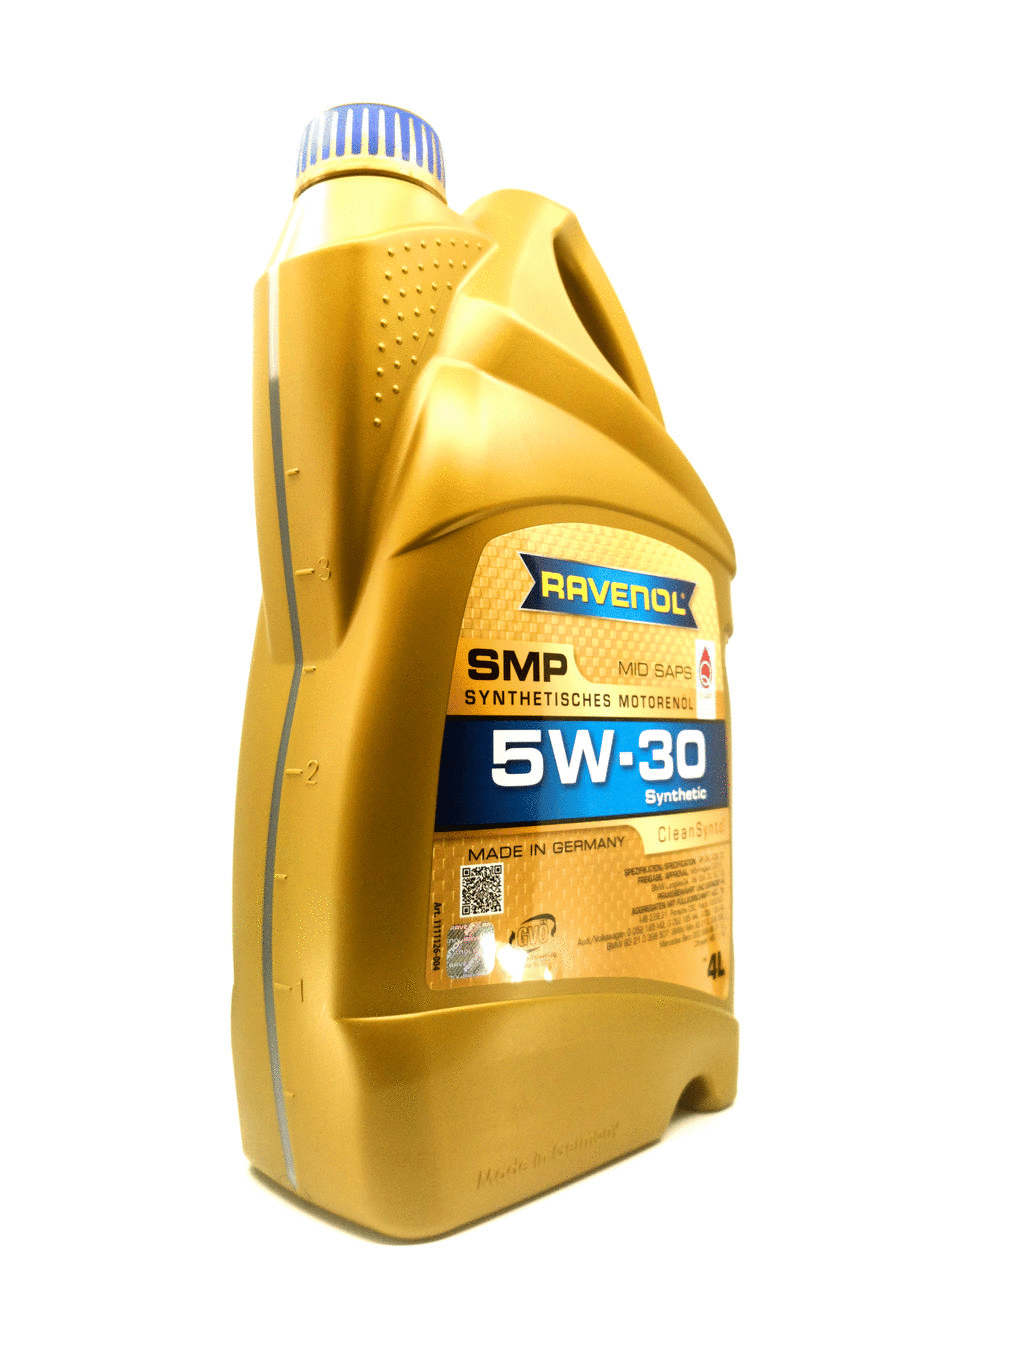 Мотор масло равенол. Равенол smp 5w30. Моторное масло Ravenol 5w30. Ravenol 504 507 5w30. Равенол 5w30 малозерный.